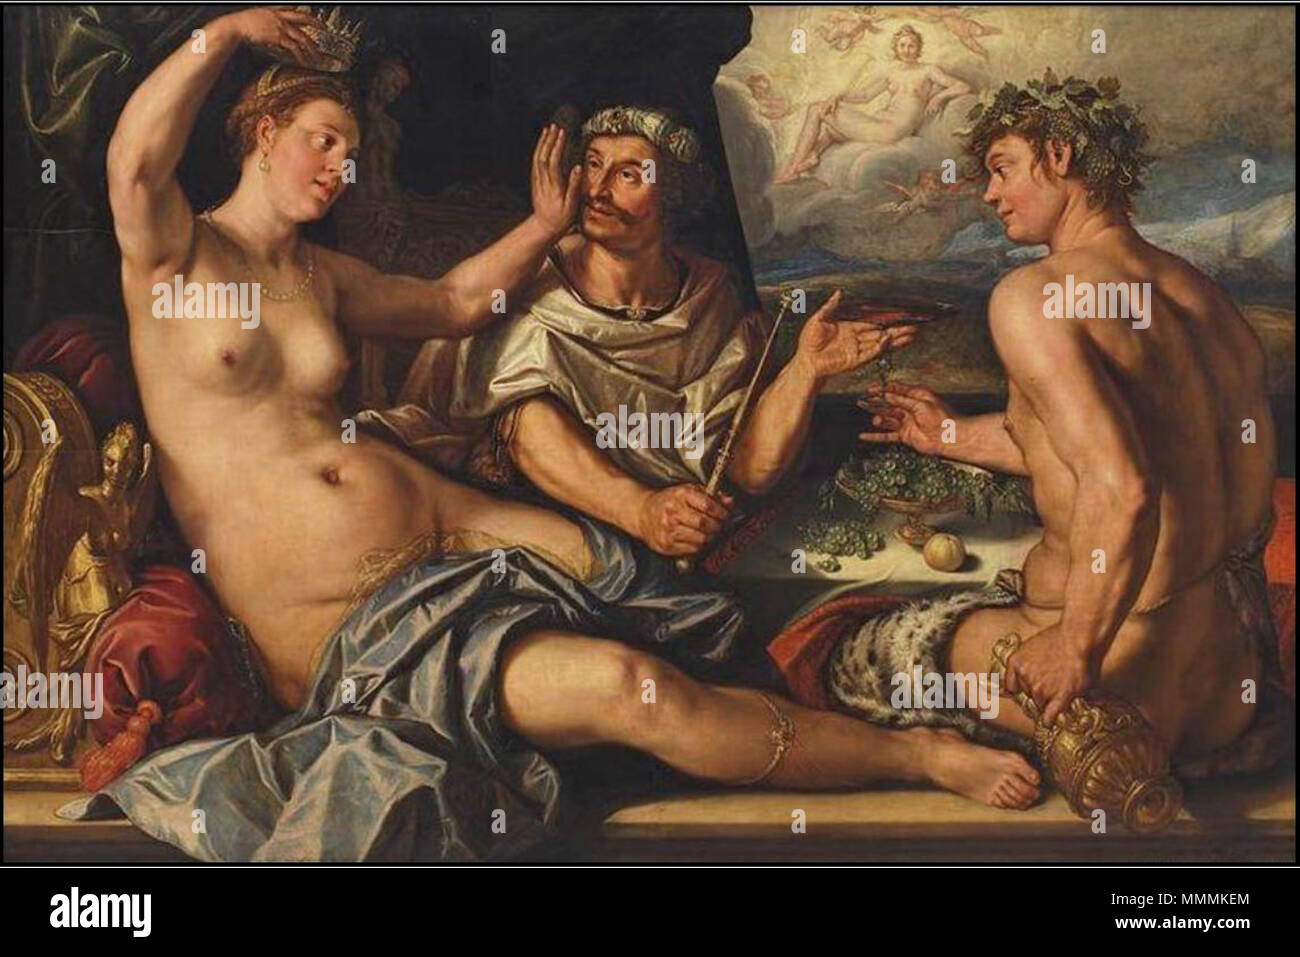 .  English: Bacchus is handling the king a goblet, but at the very same moment the king is being slapped on the cheek by his concubine Apame, who has taken off his crown and is placing it on her own head in illustration of 3 Esdras 4:29.  . 1 January 1614.   Hendrik Goltzius  (1558–1617)     Alternative names Hendrick Goltius, Hendrick Goltz, Hendrick Golzius, Hendrick van Bracht, Hendricus Goltzius, Henricus Goltzius, Hendrick Gols, Hendrik Gols, Hendrik Goltz, Hendrik Goltius, Henrik Golzius  Description Dutch printmaker, painter, draughtsman and publisher  Date of birth/death February 1558  Stock Photo